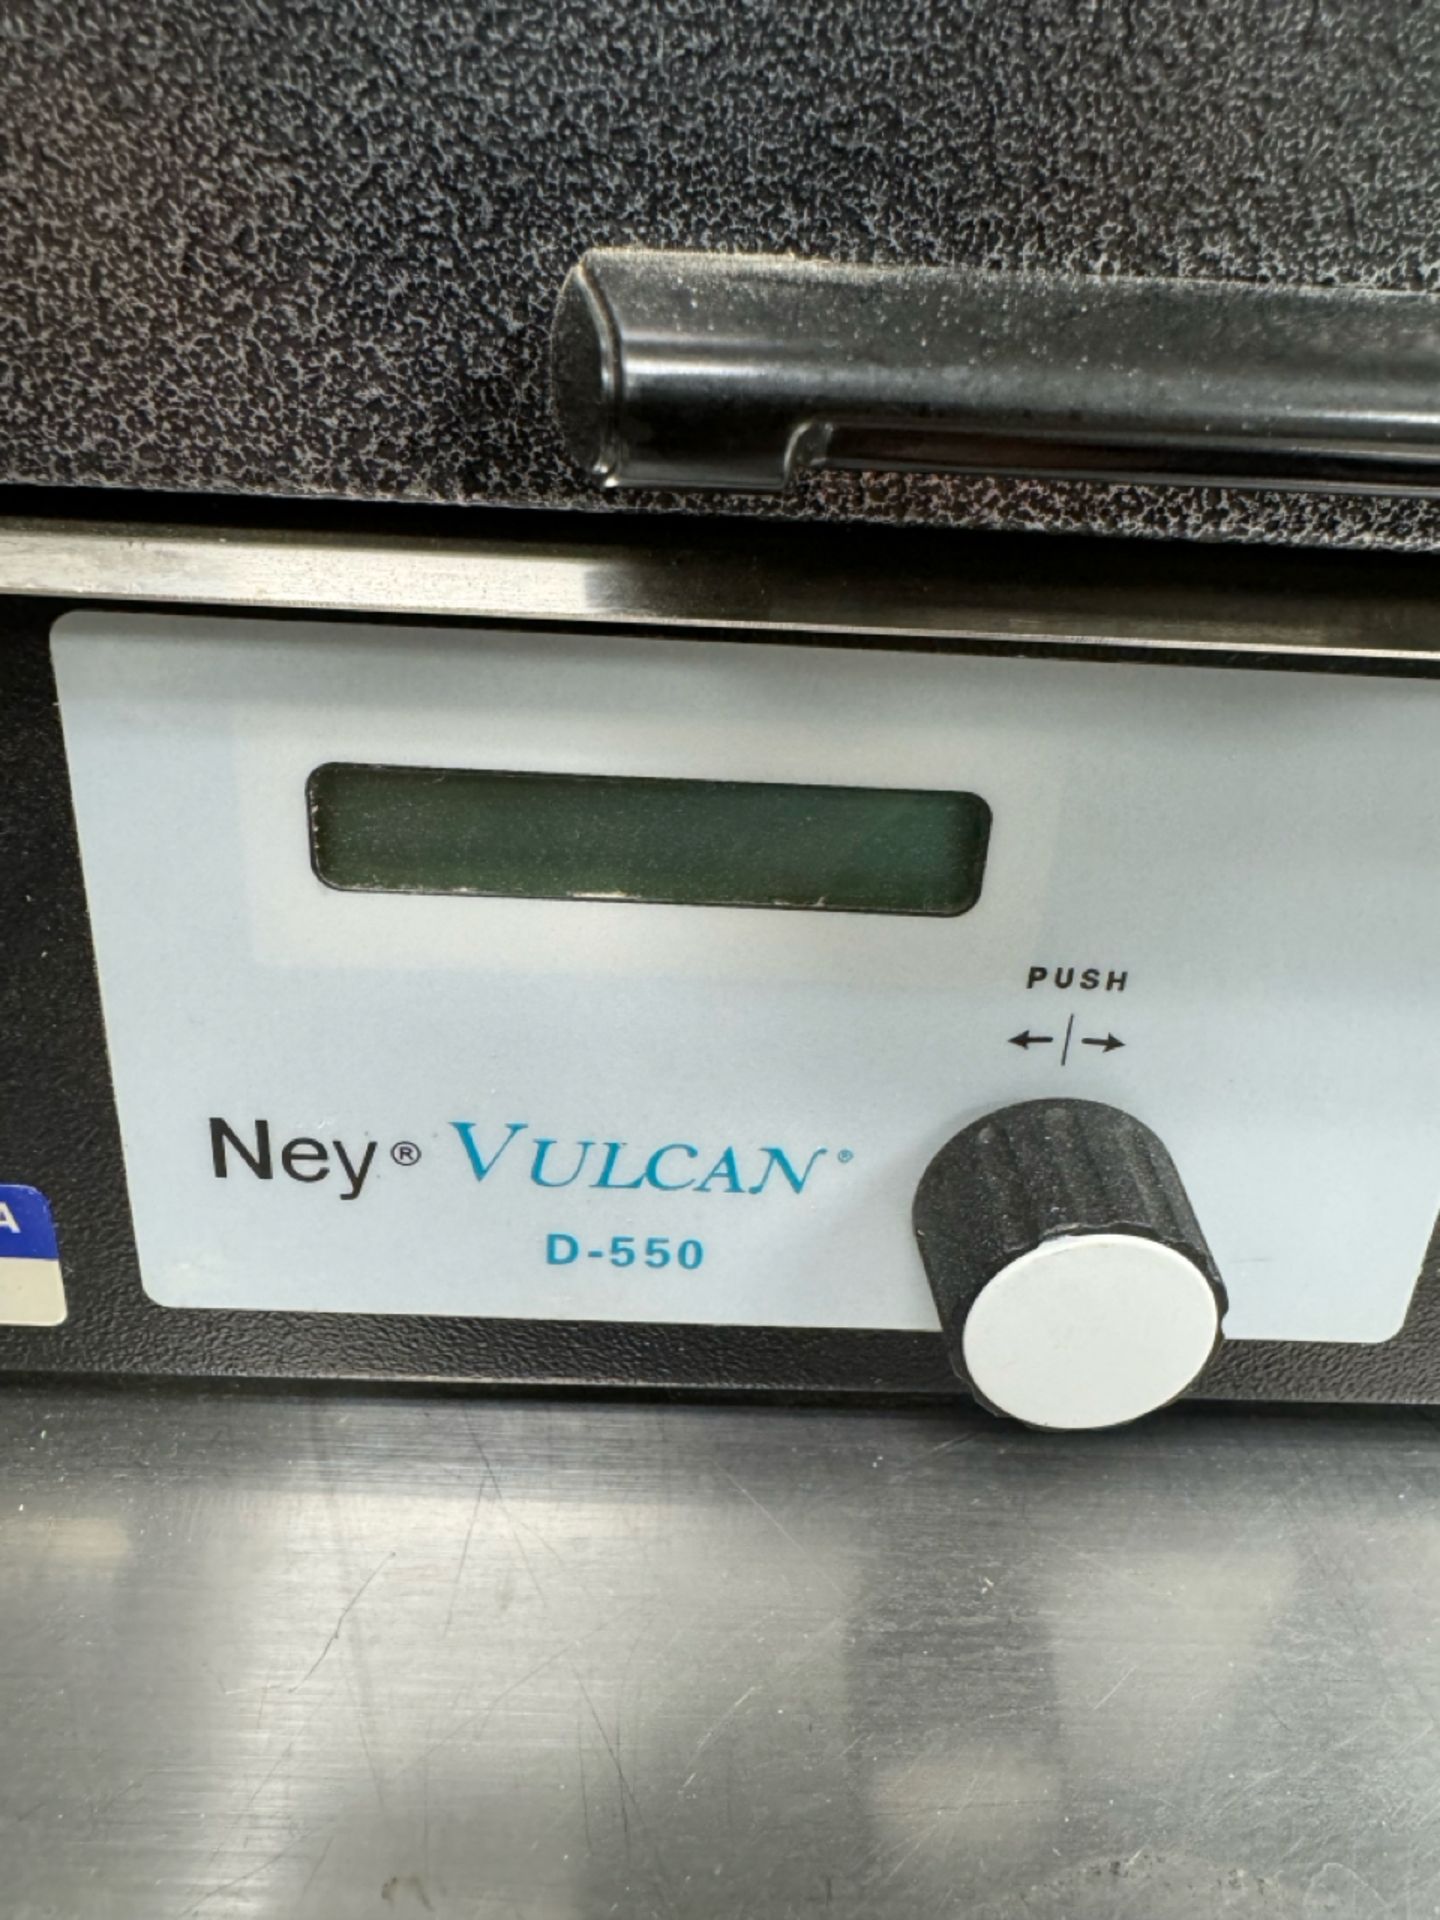 Ney Vulcan Lab Oven - Image 2 of 3